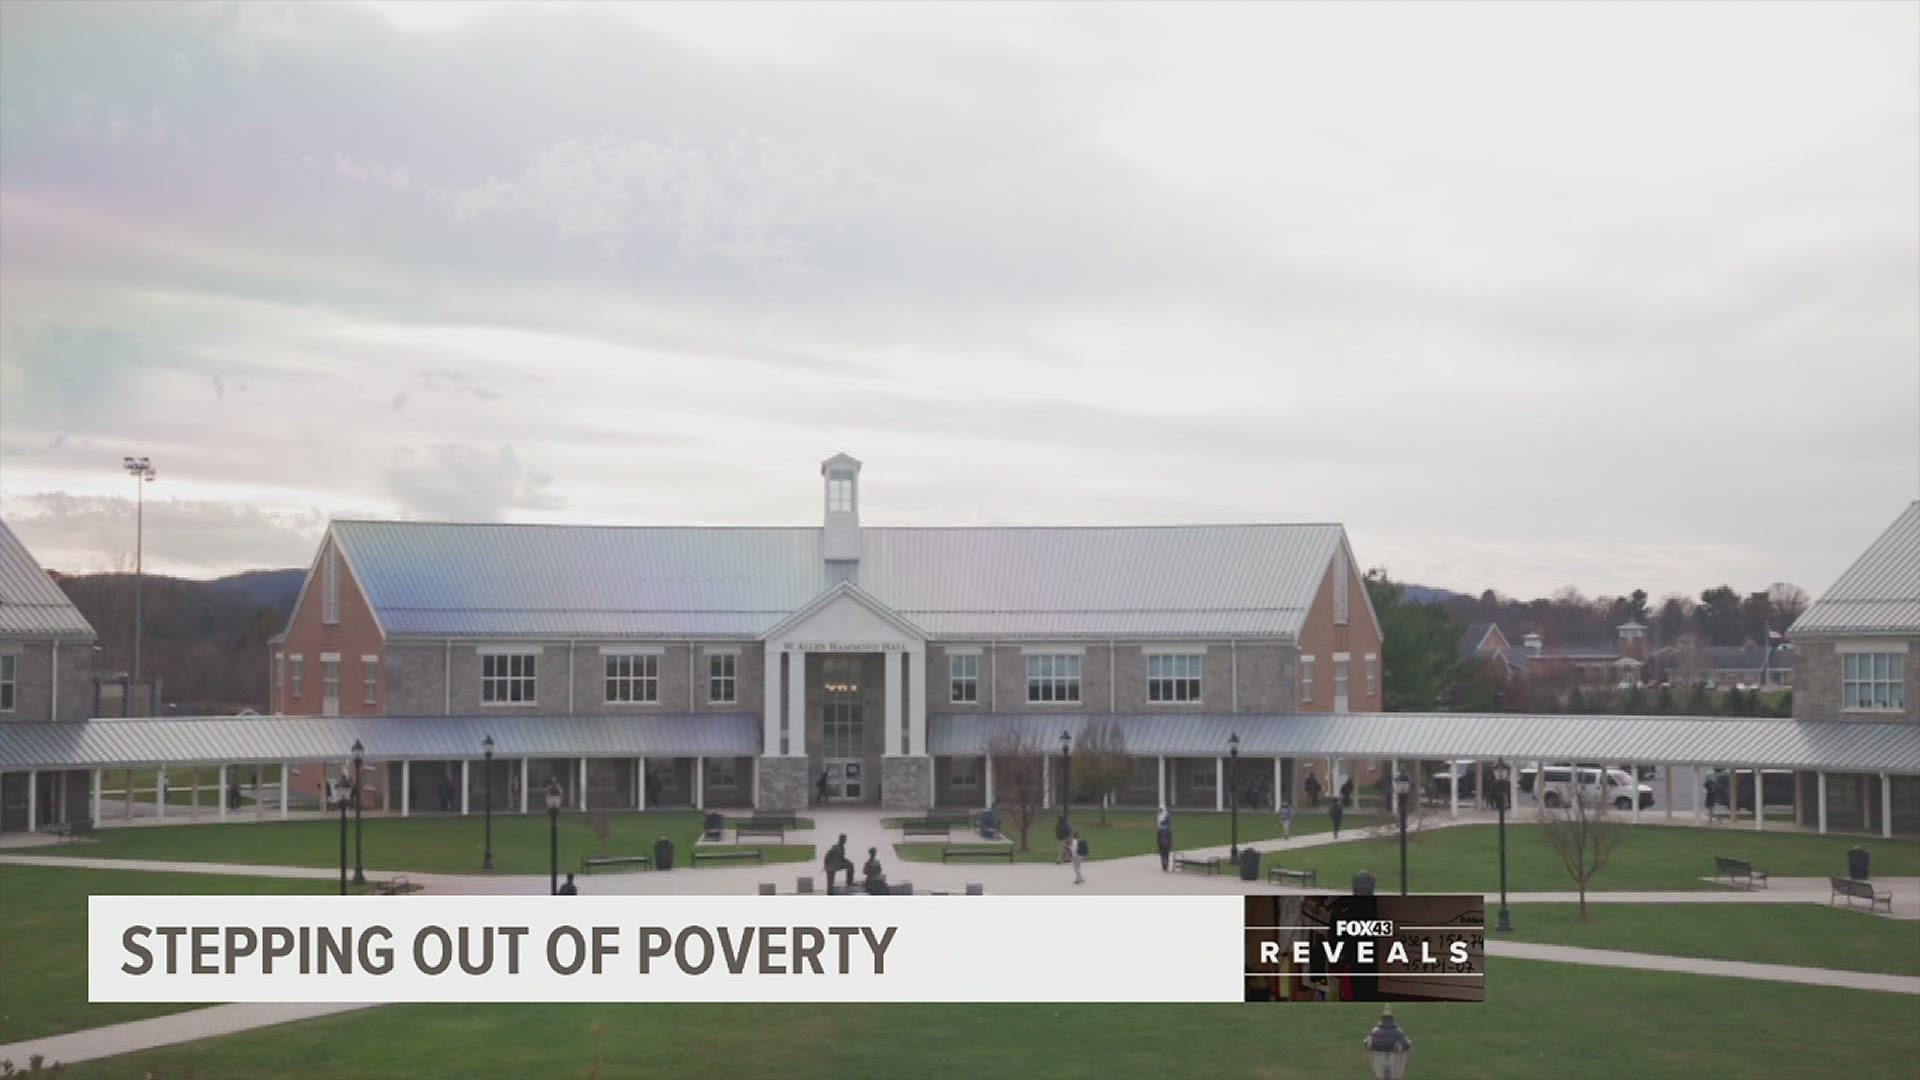 Milton Hershey School is one of the few options left for many families who are struggling with coronavirus closures and layoffs.